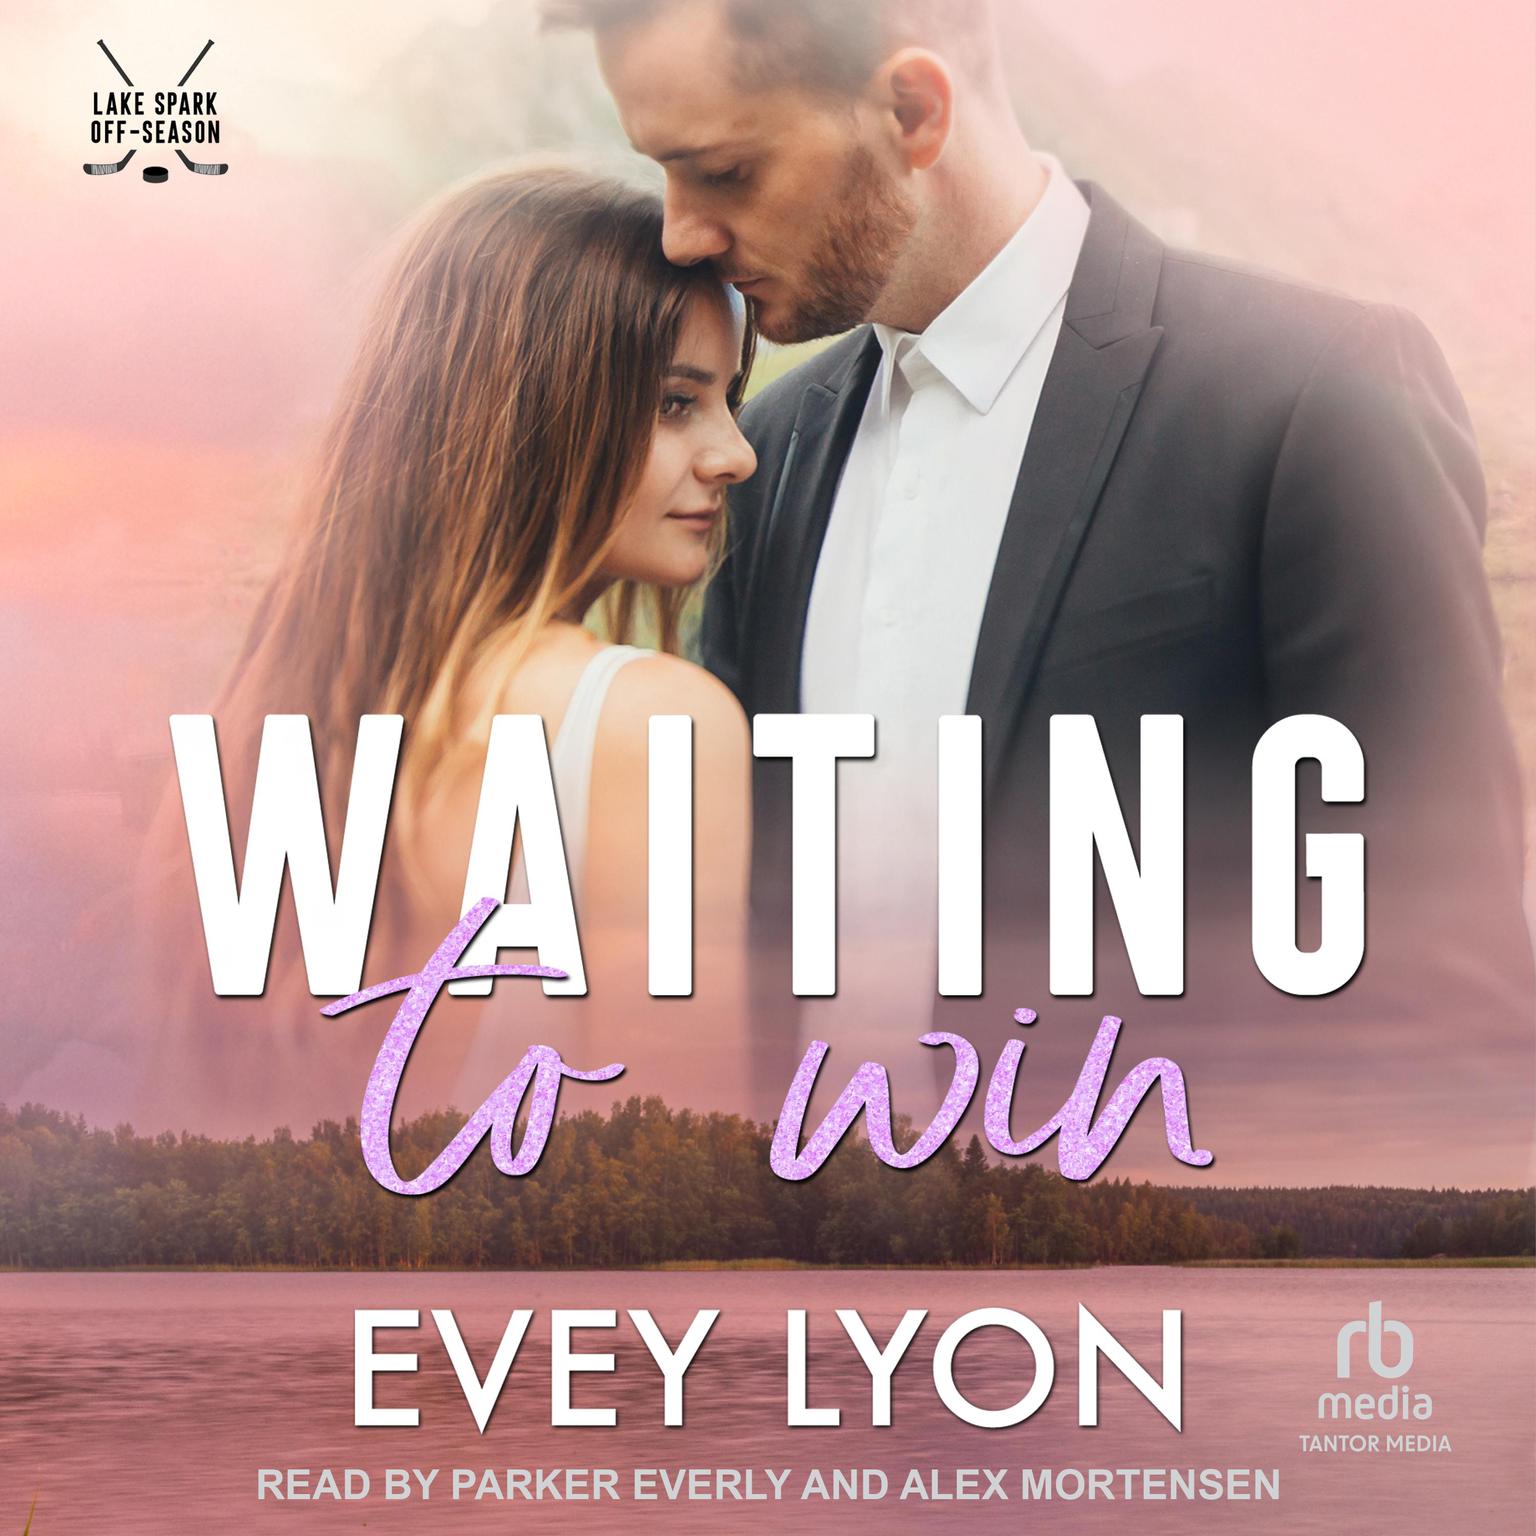 Waiting To Win Audiobook, by Evey Lyon